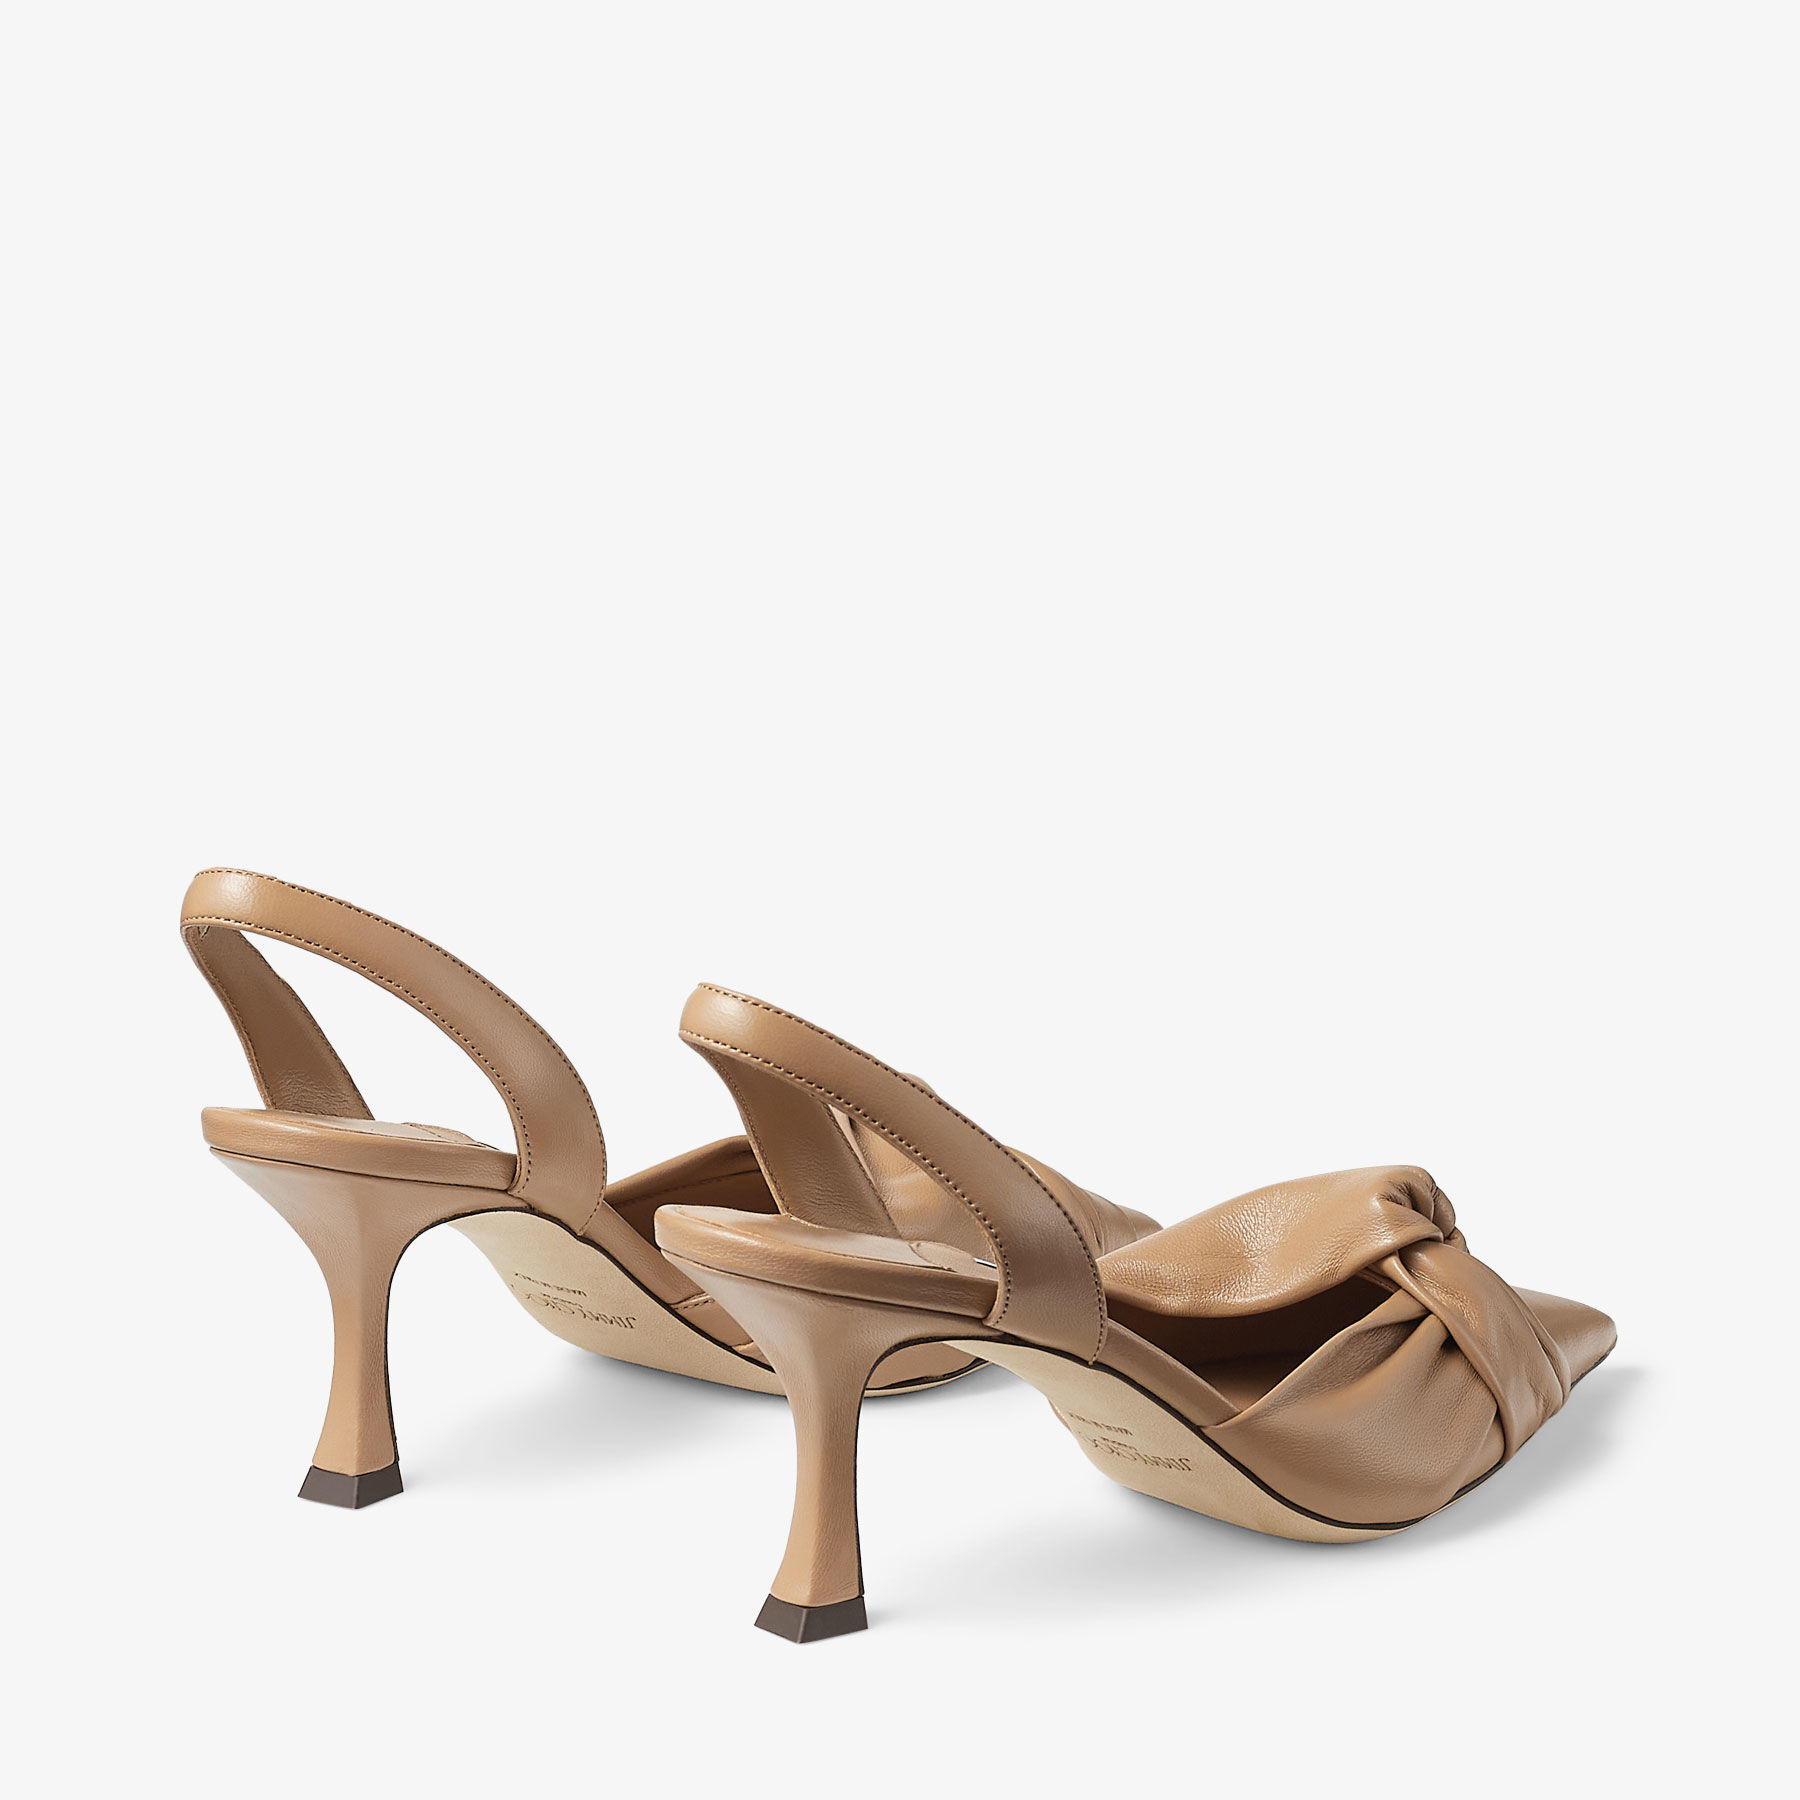 Hedera Sb 70 | Biscuit Nappa Leather Sling Back Pumps | New Collection ...